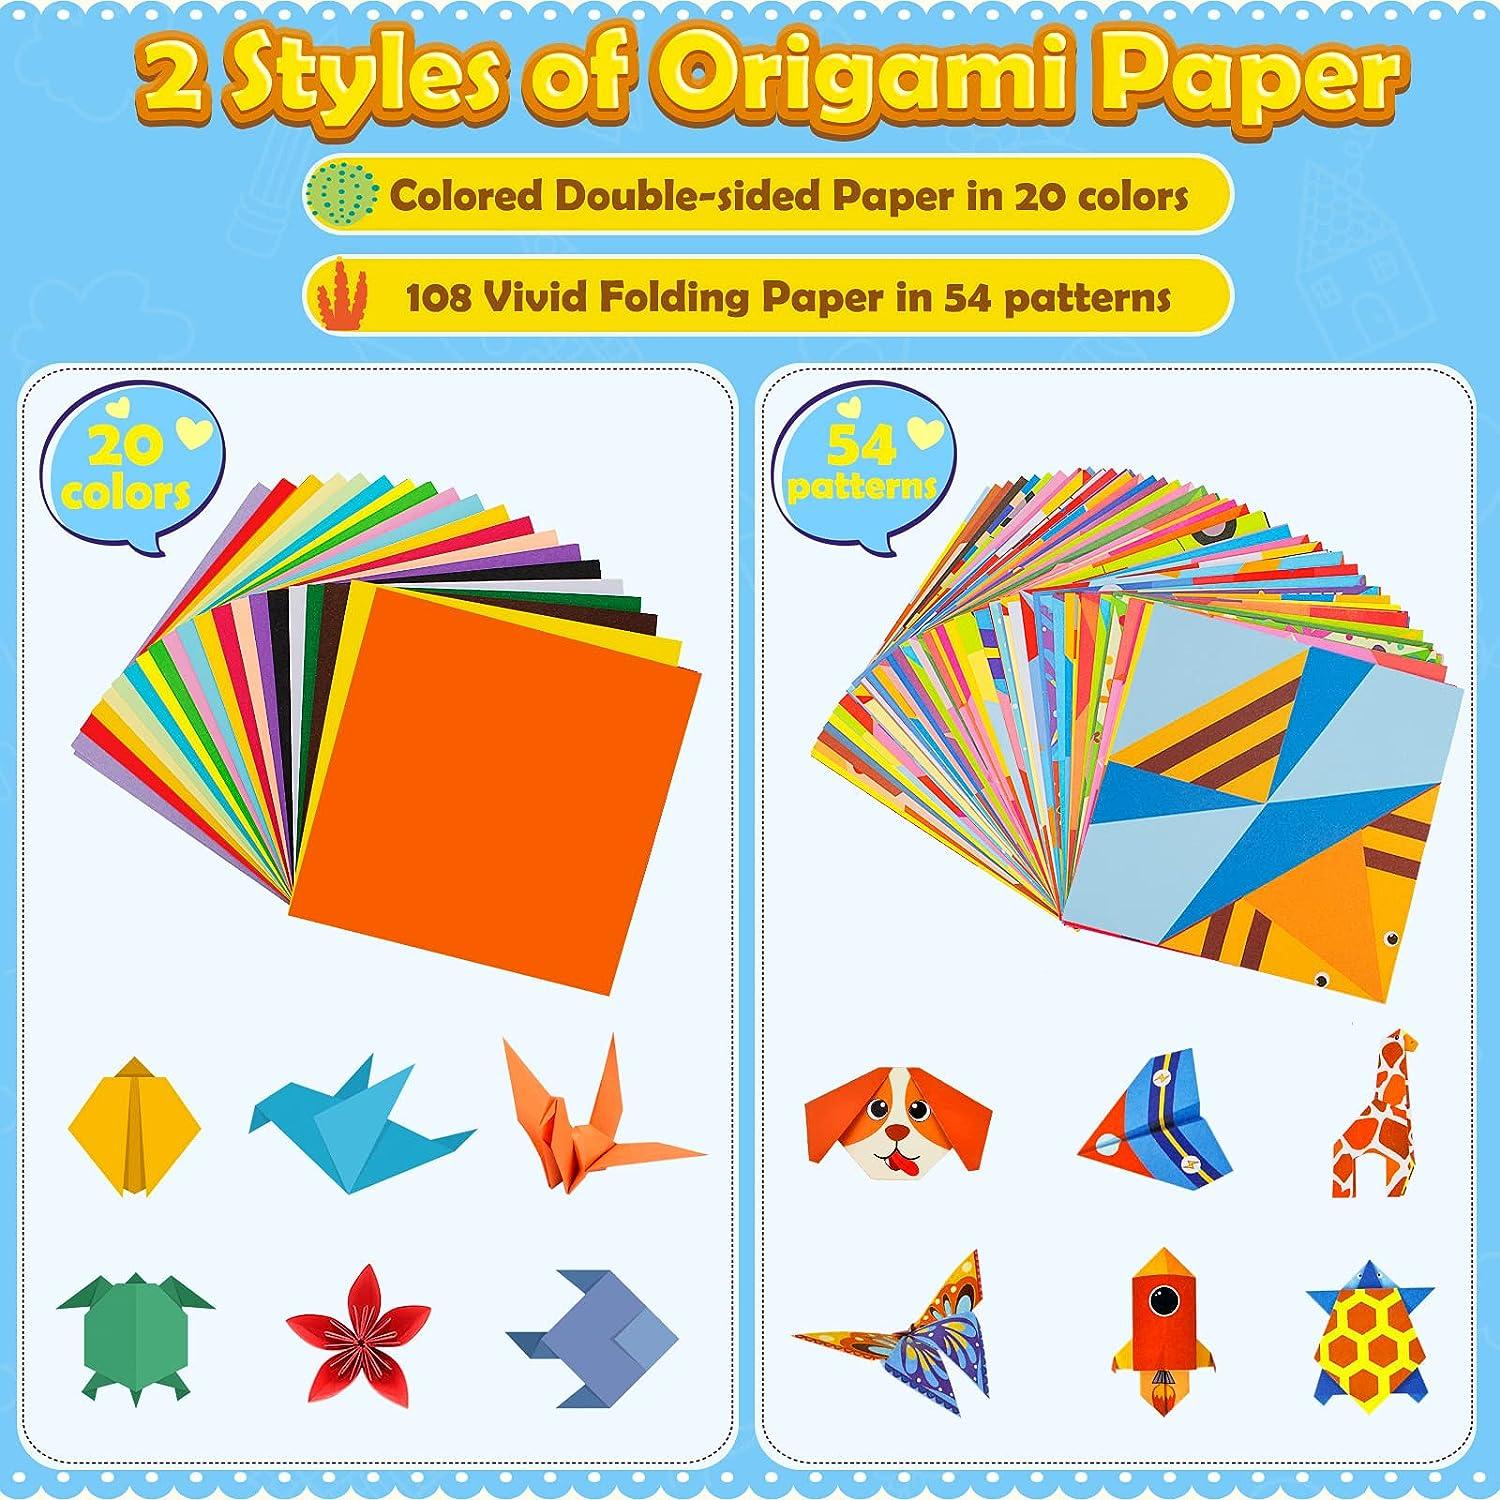 Gifts for 7 8 9 10 11 12 Year Old Girls Boys Toy, Origami Arts and Crafts  for Kids Age 6-12 Years Old Girls Boys Children Gift, Origami Paper Craft